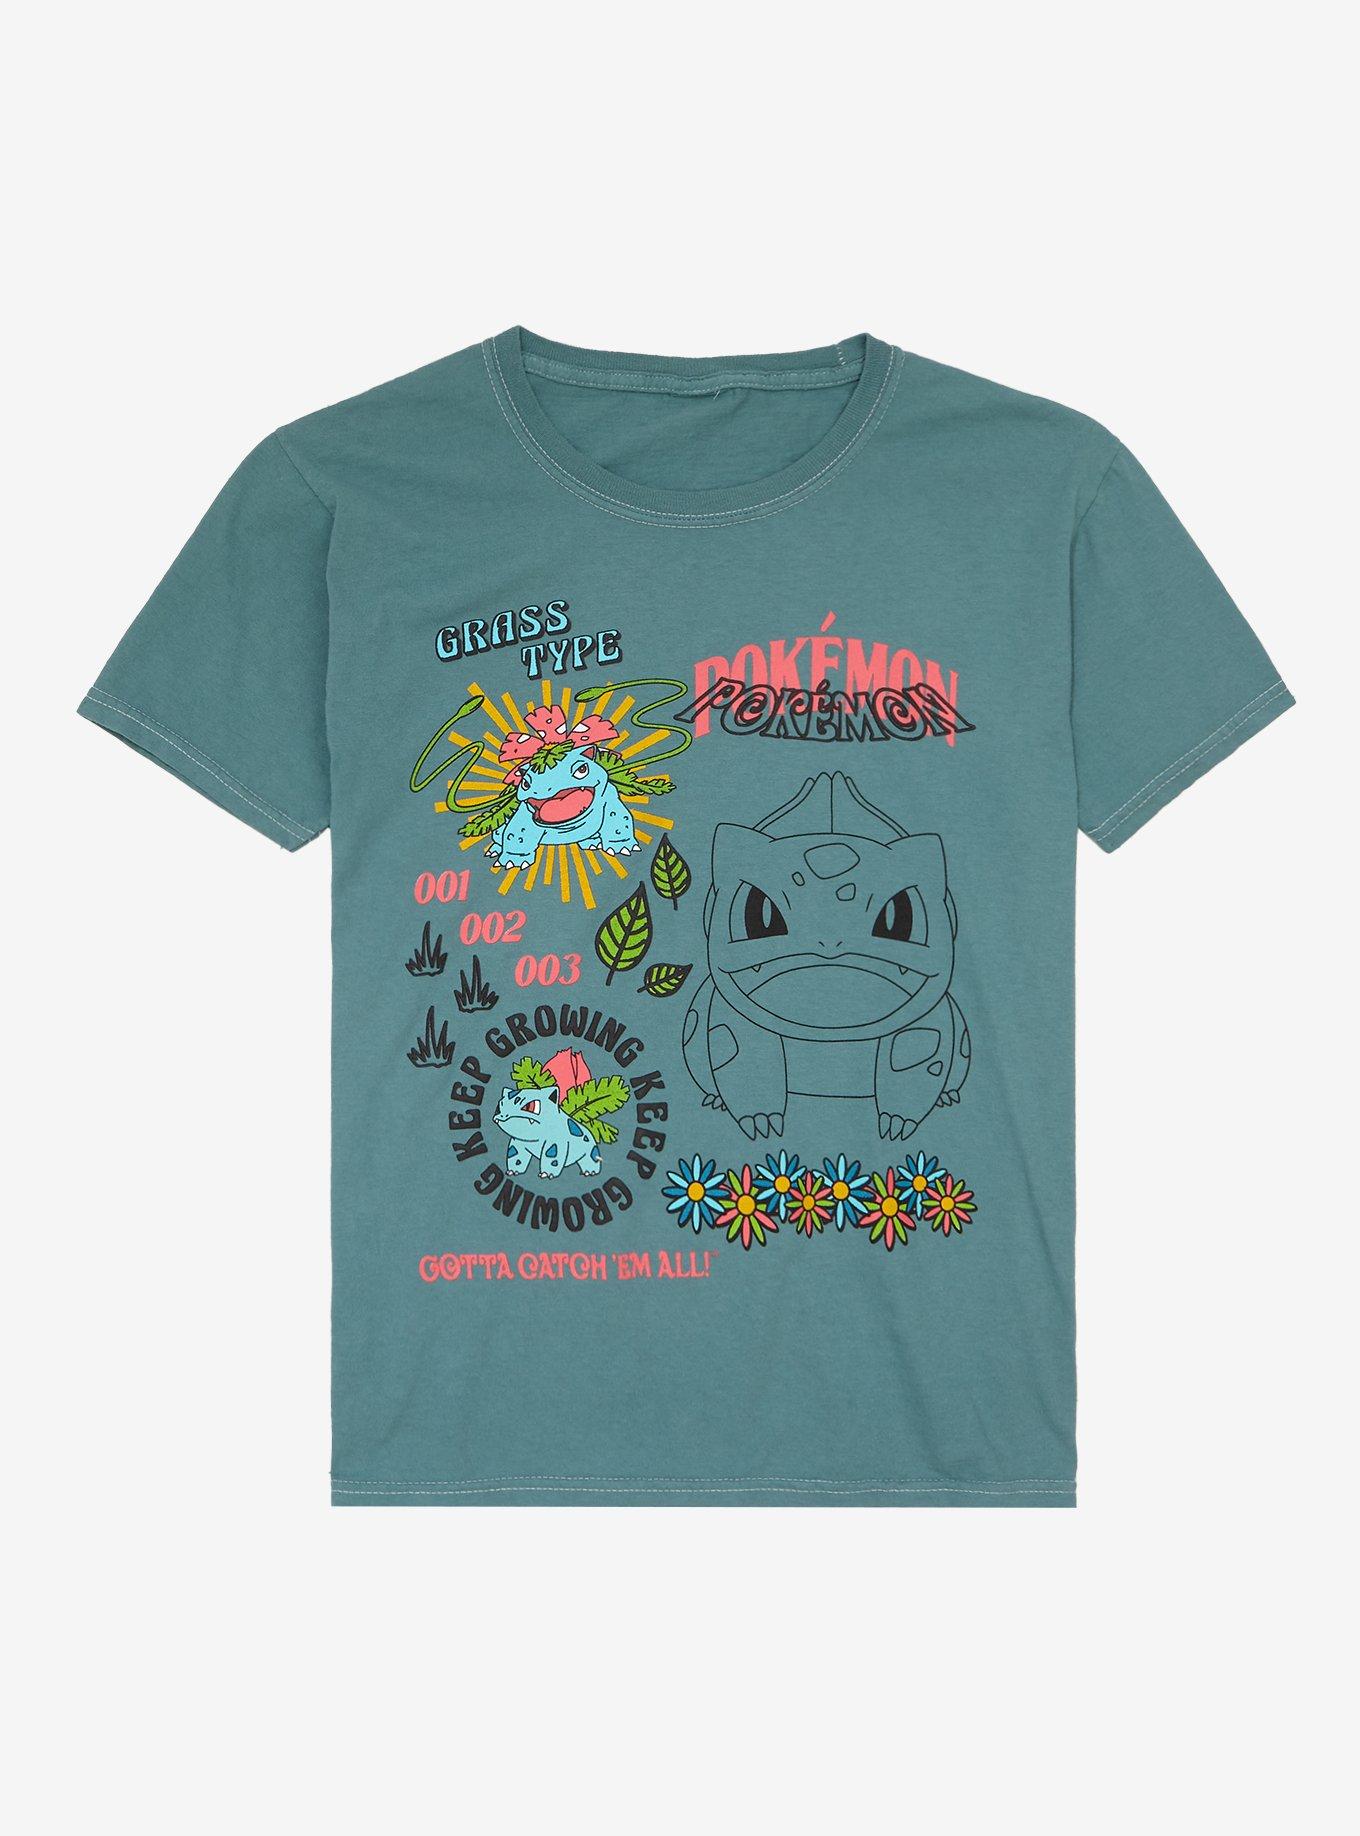 Pokémon Bulbasaur Evolutions Youth T-Shirt - BoxLunch Exclusive, TEAL, hi-res